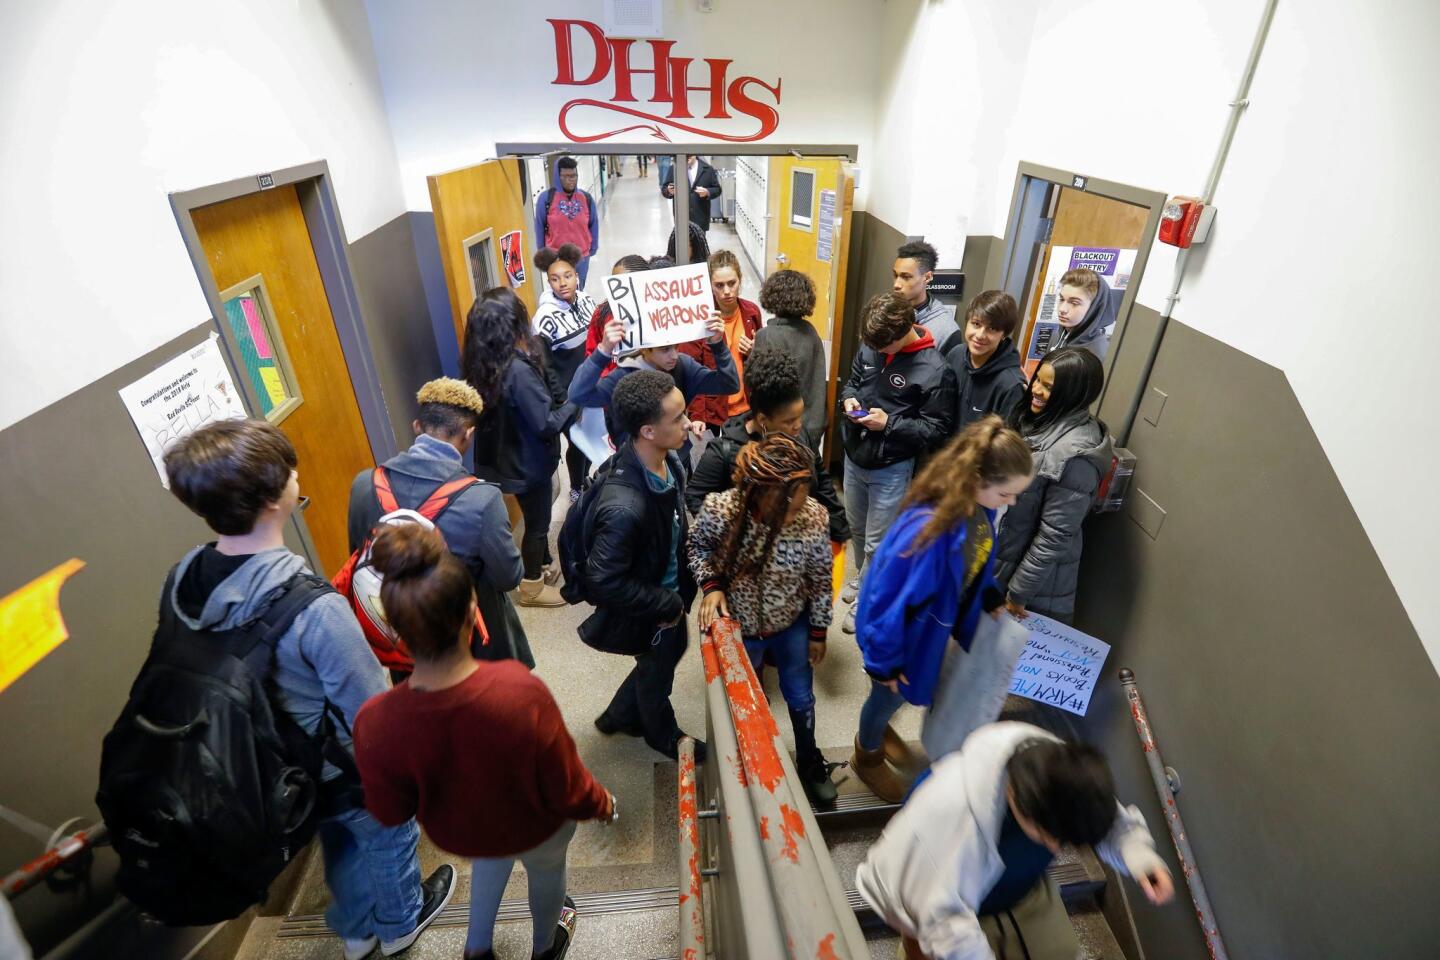 Students walkout of classes to protest gun violence